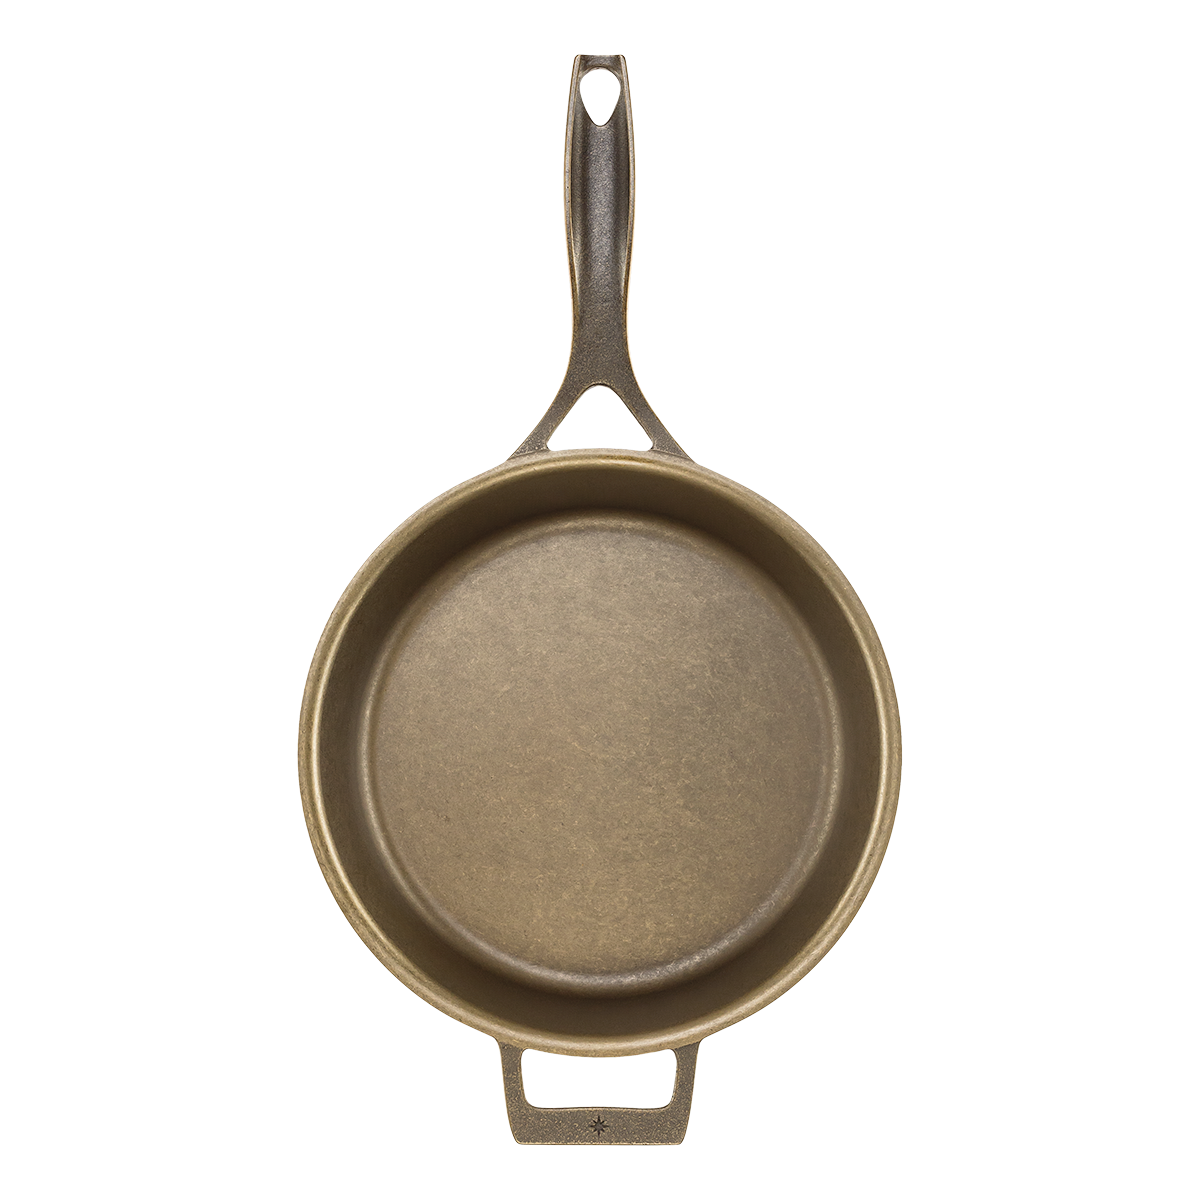 12-inch cast iron skillet featuring a stay-cool handle and even heat distribution.